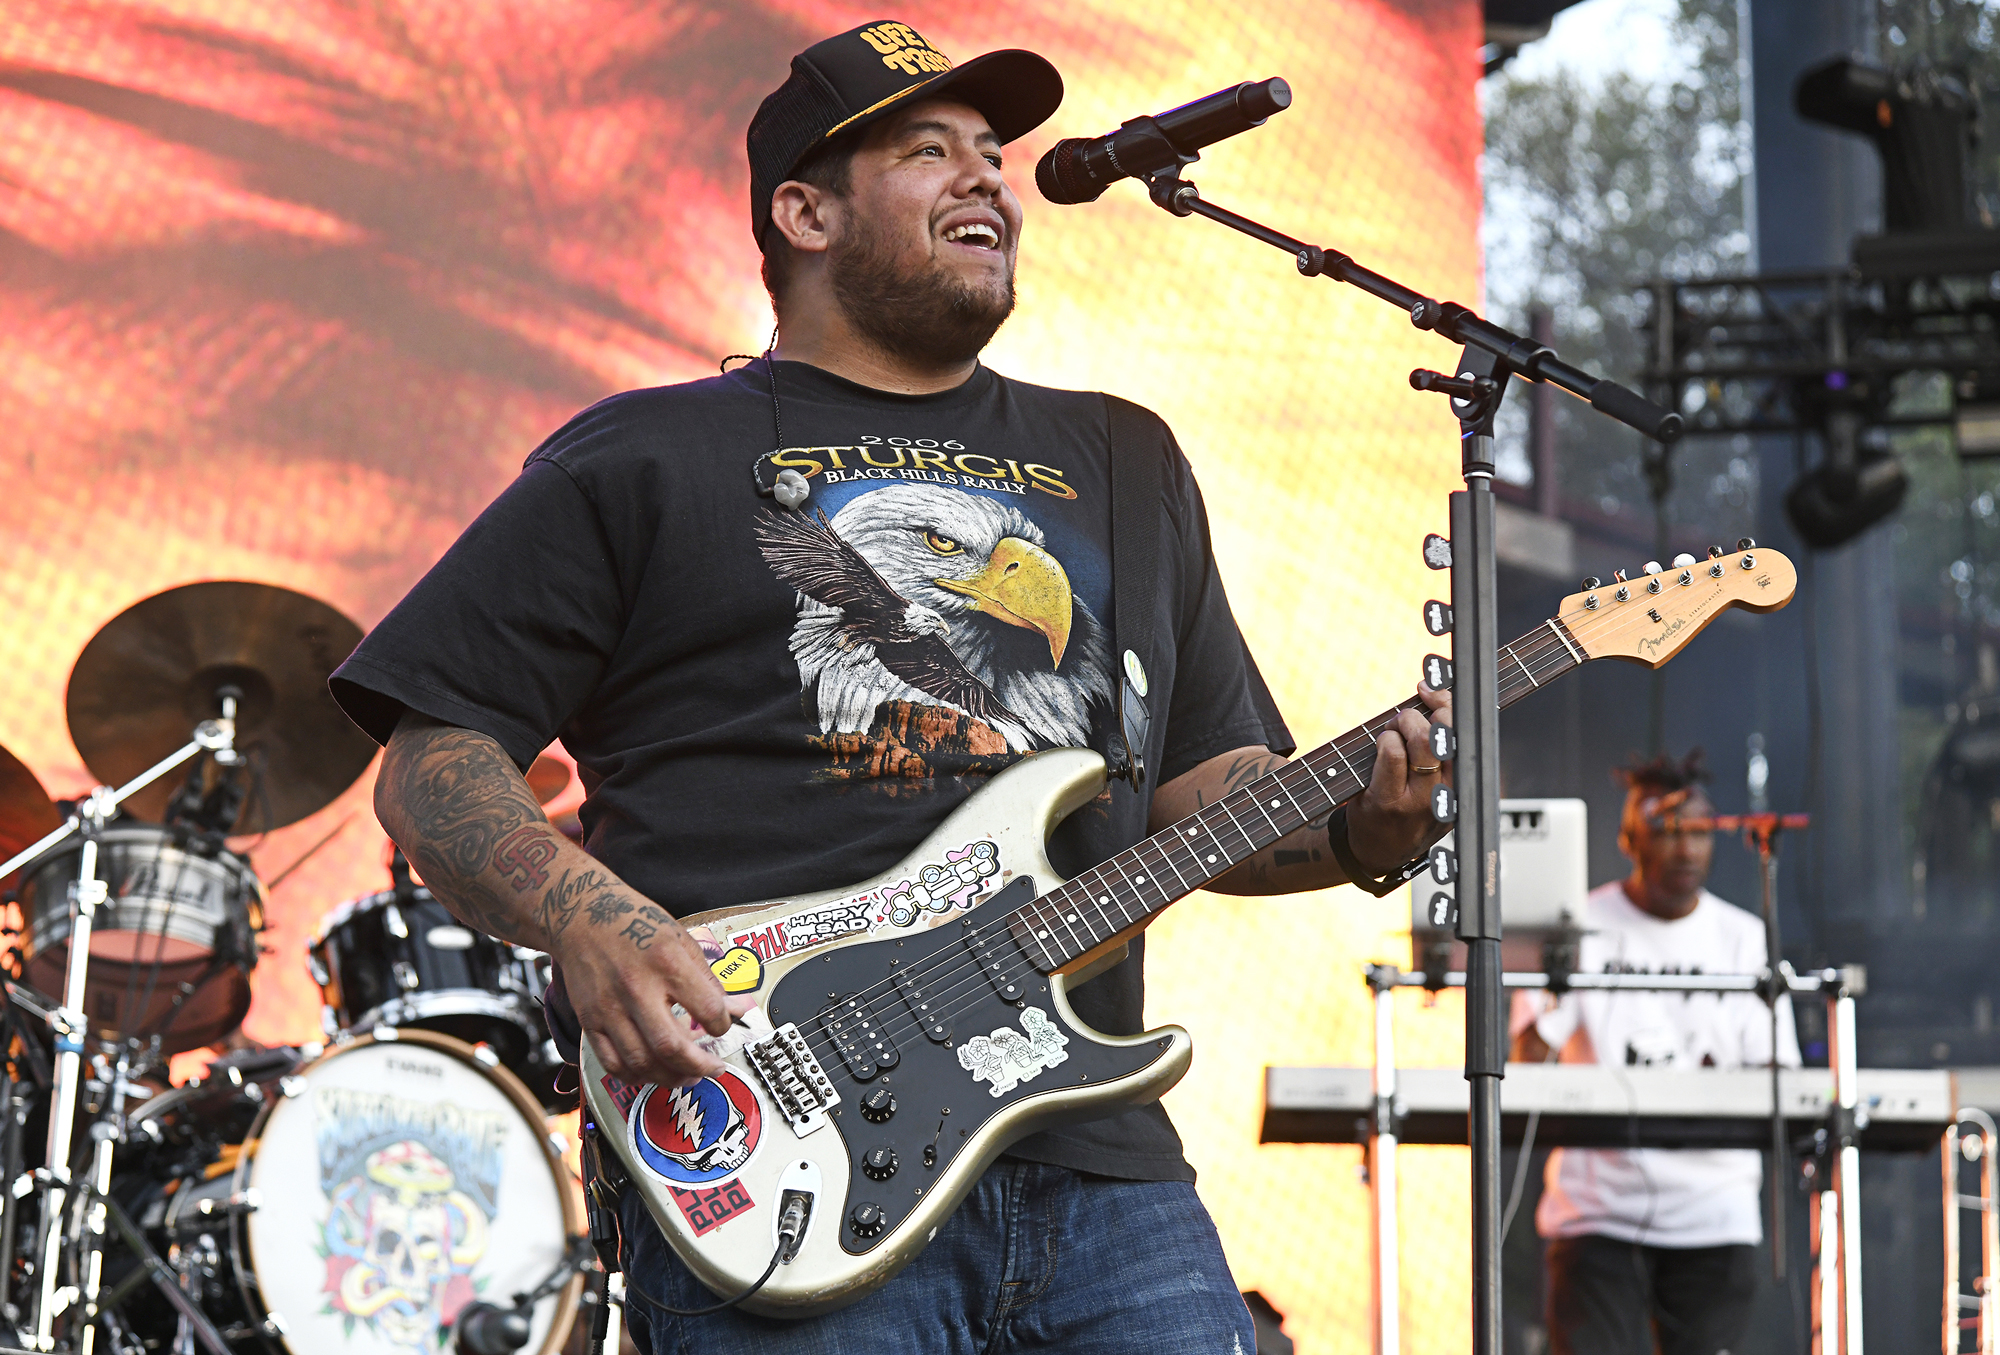 Rome Ramirez Talks Sublime with Rome, Gives Jakob Nowell ‘His Flowers’